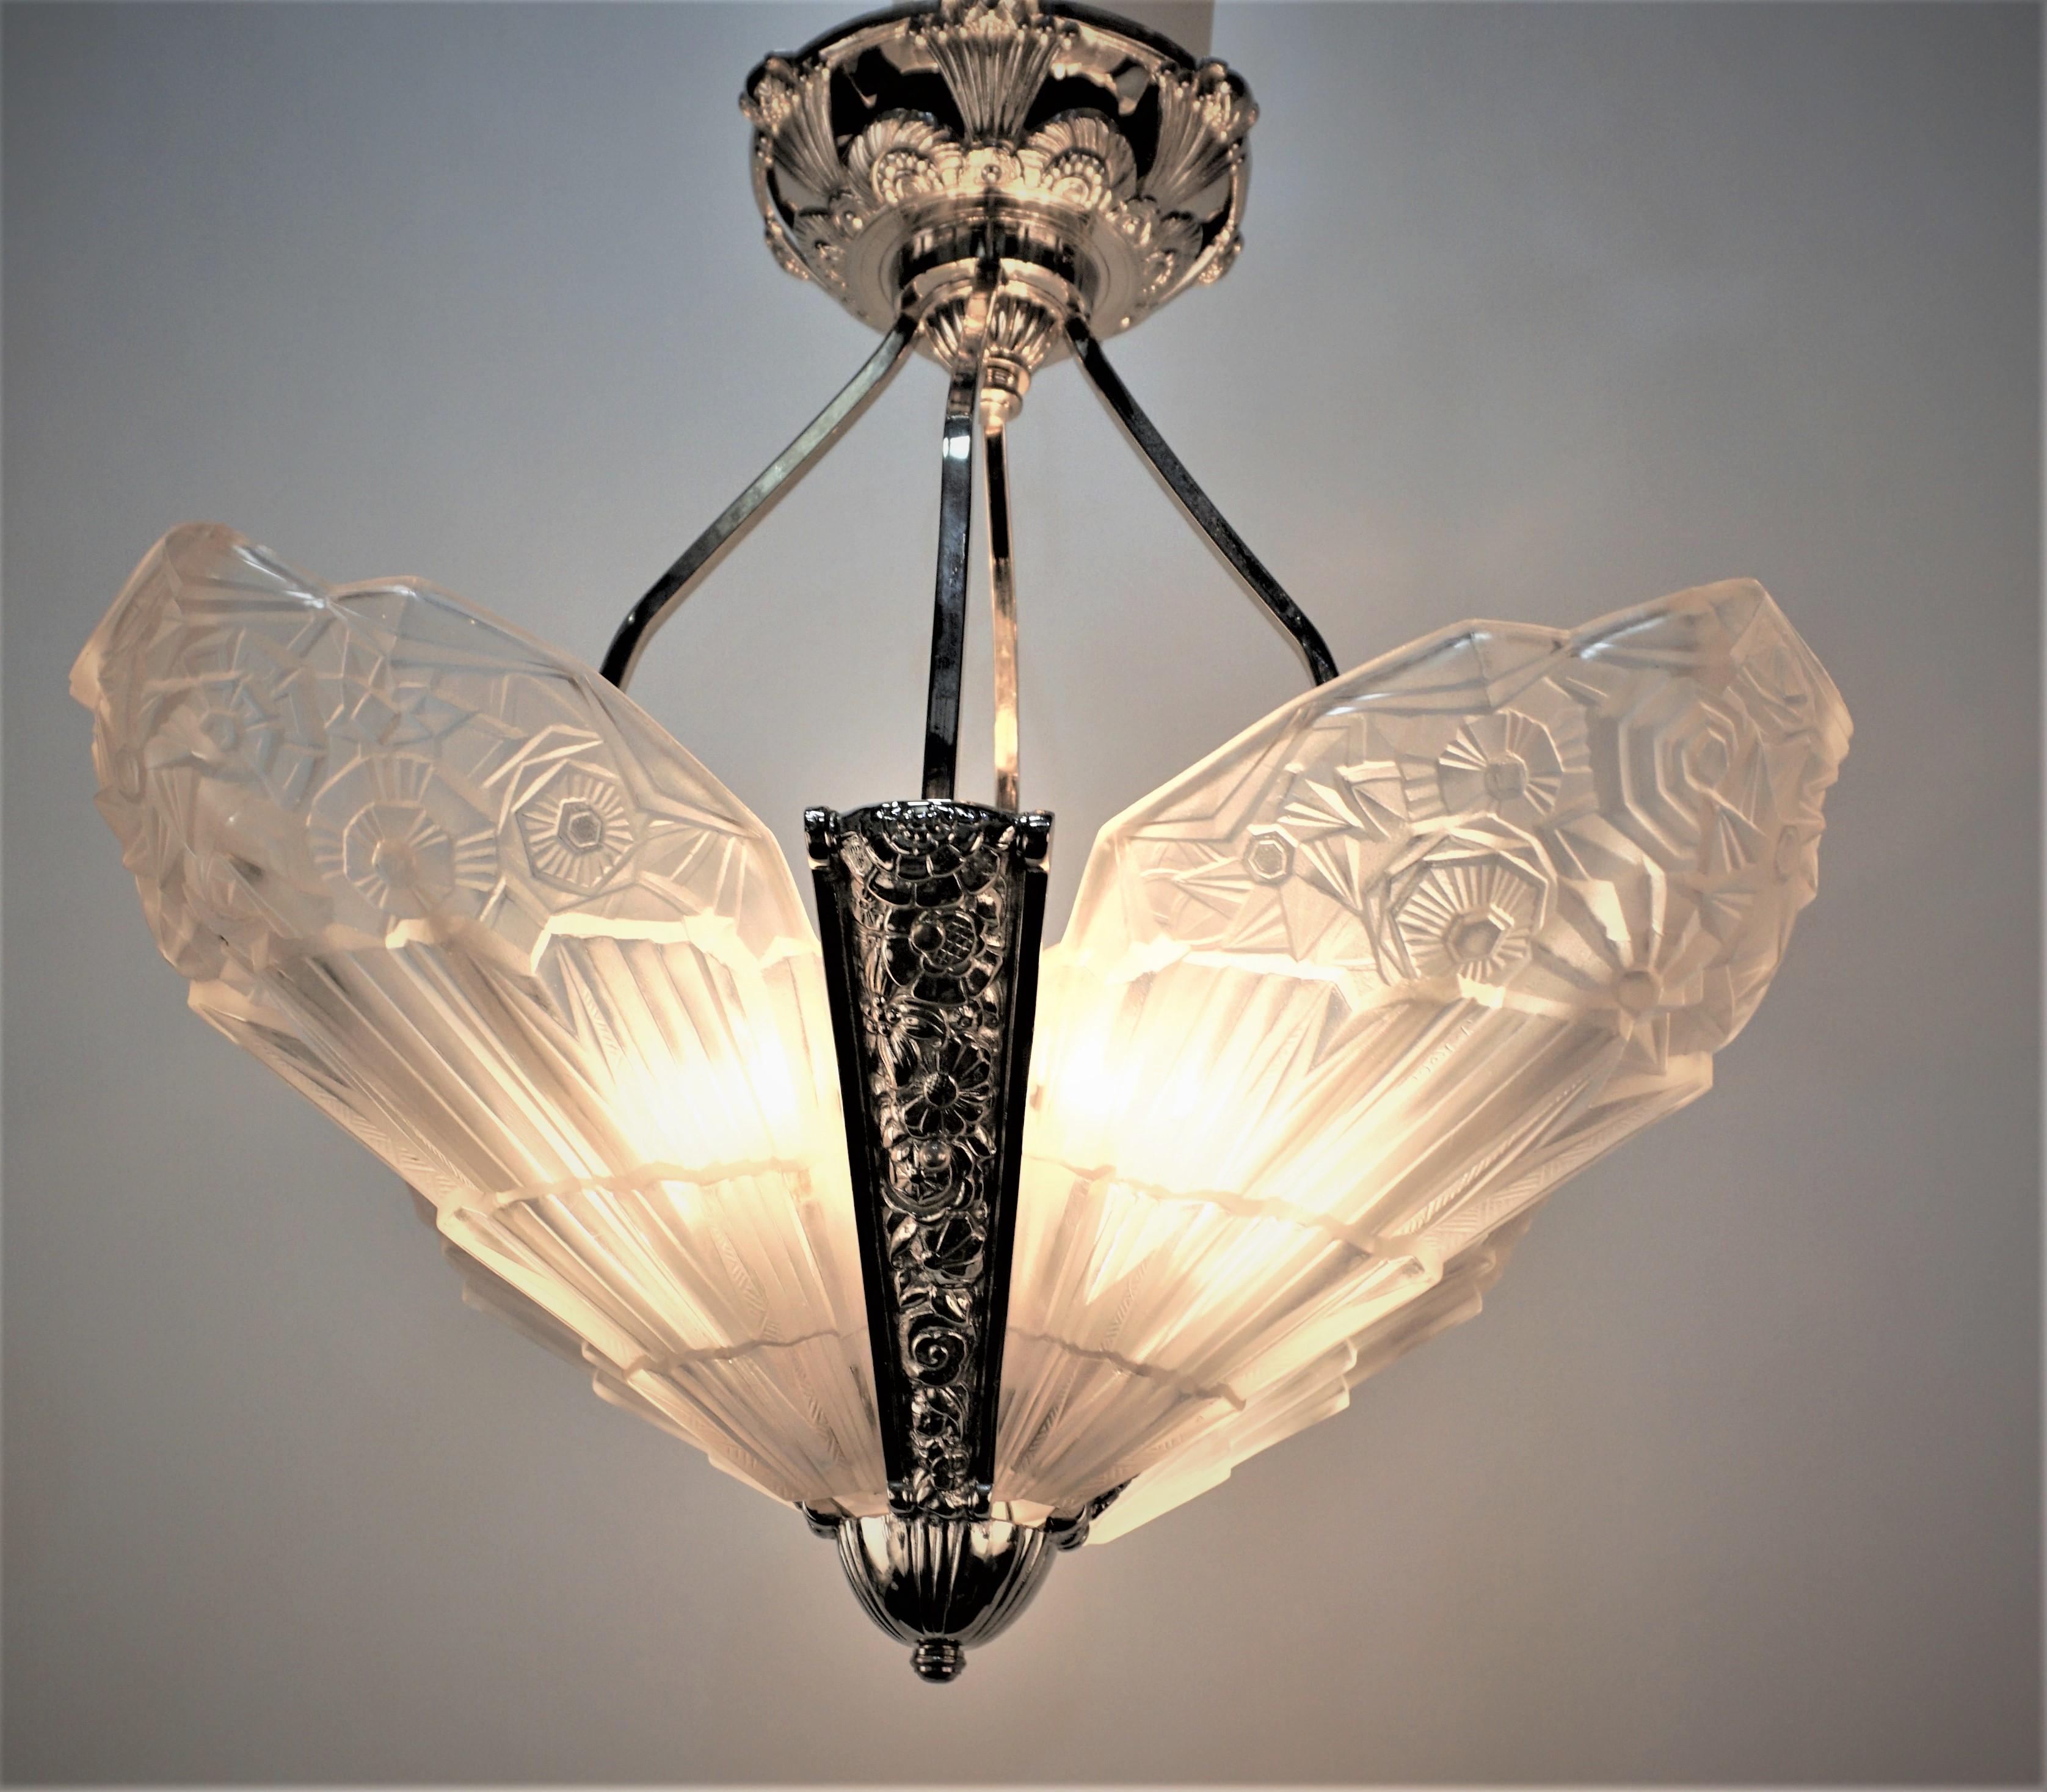 French 1920's Art Deco Chandelier In Good Condition For Sale In Fairfax, VA